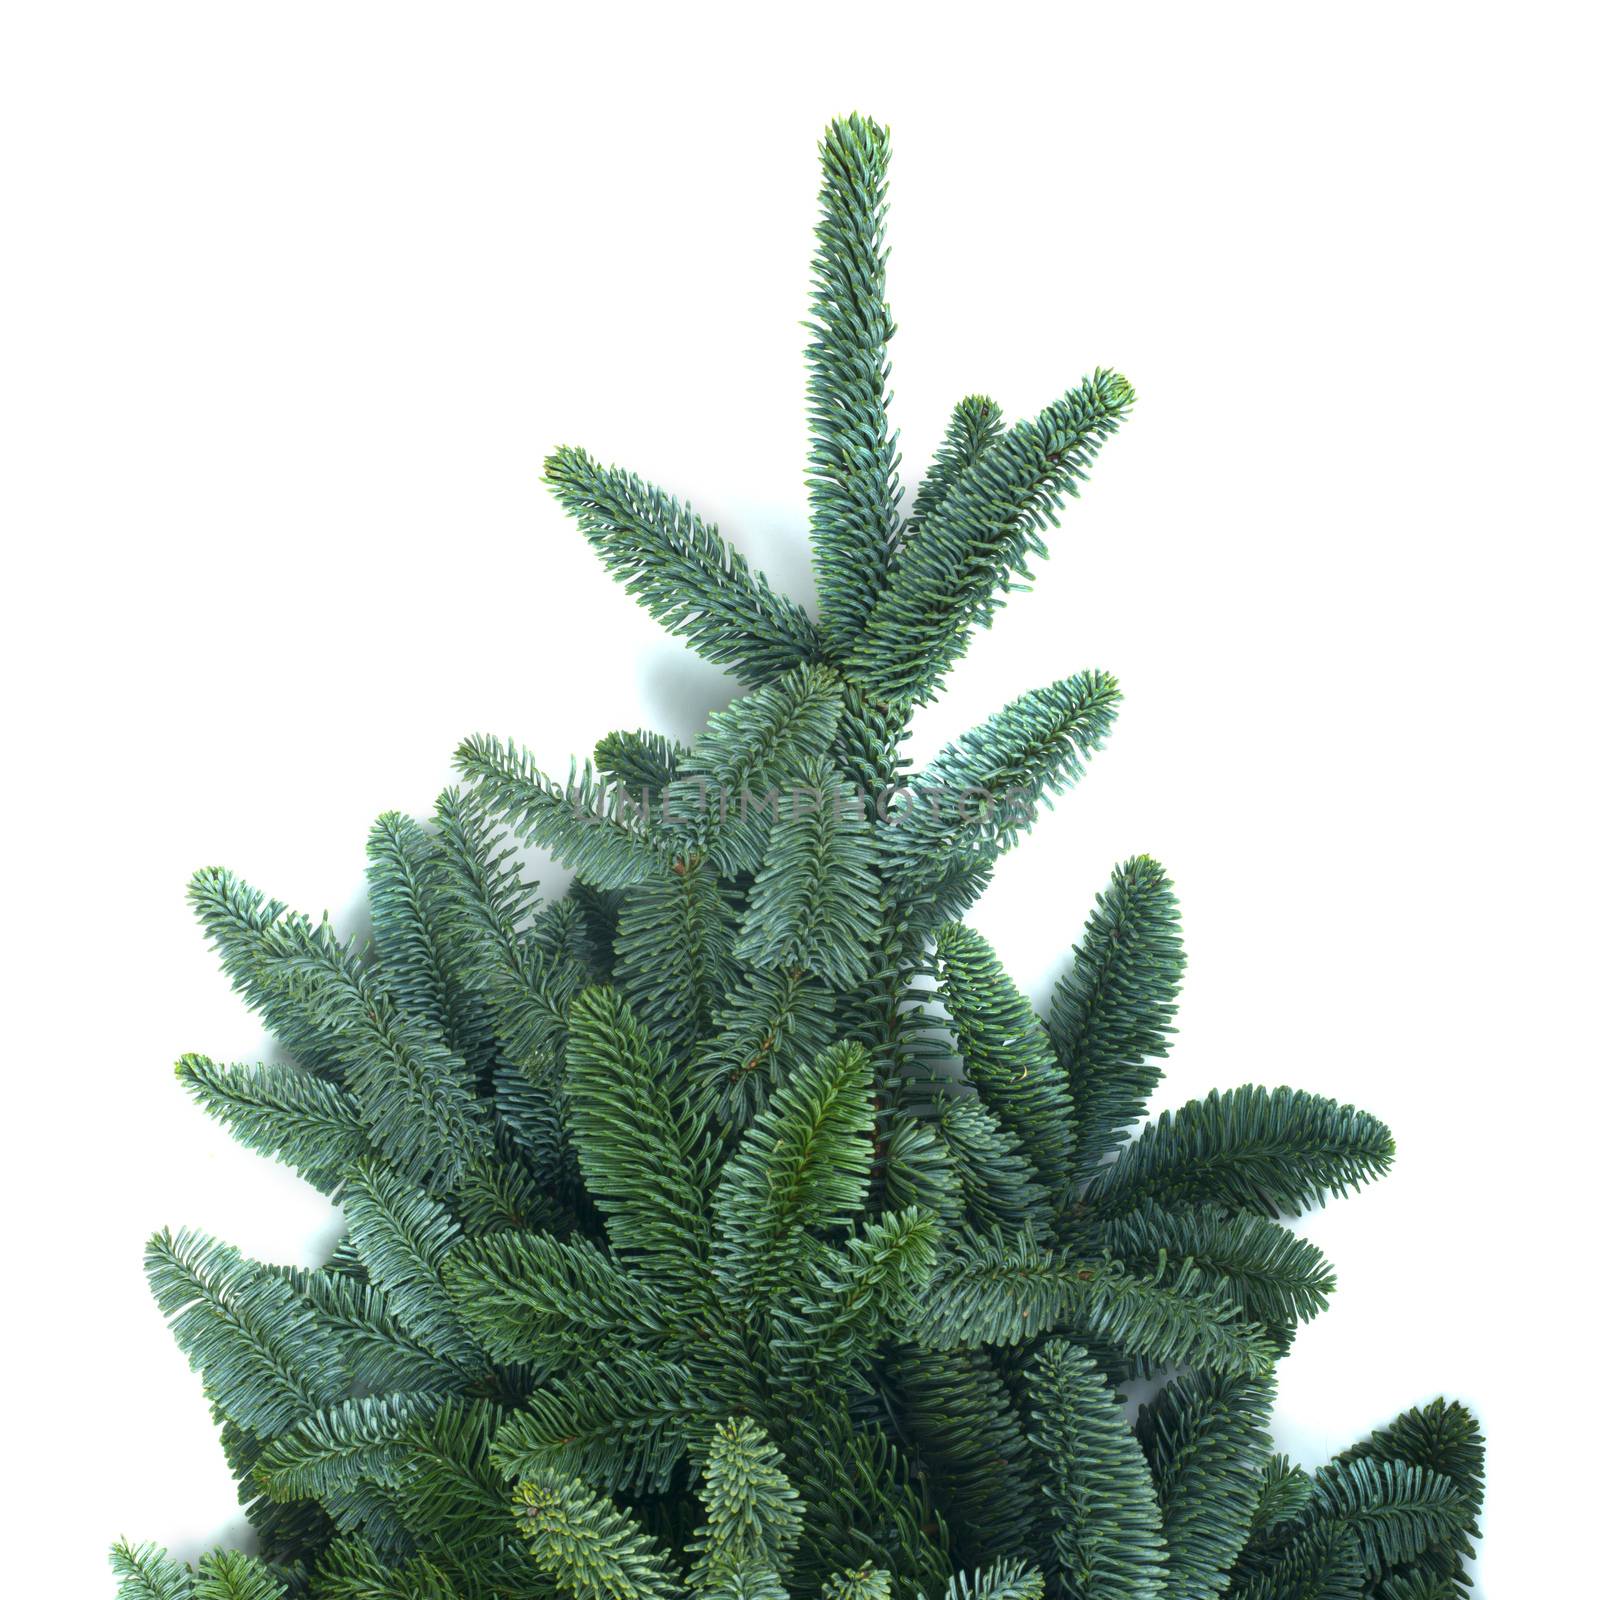 Traditional green christmas tree noble fir isolated on white background copy space for text